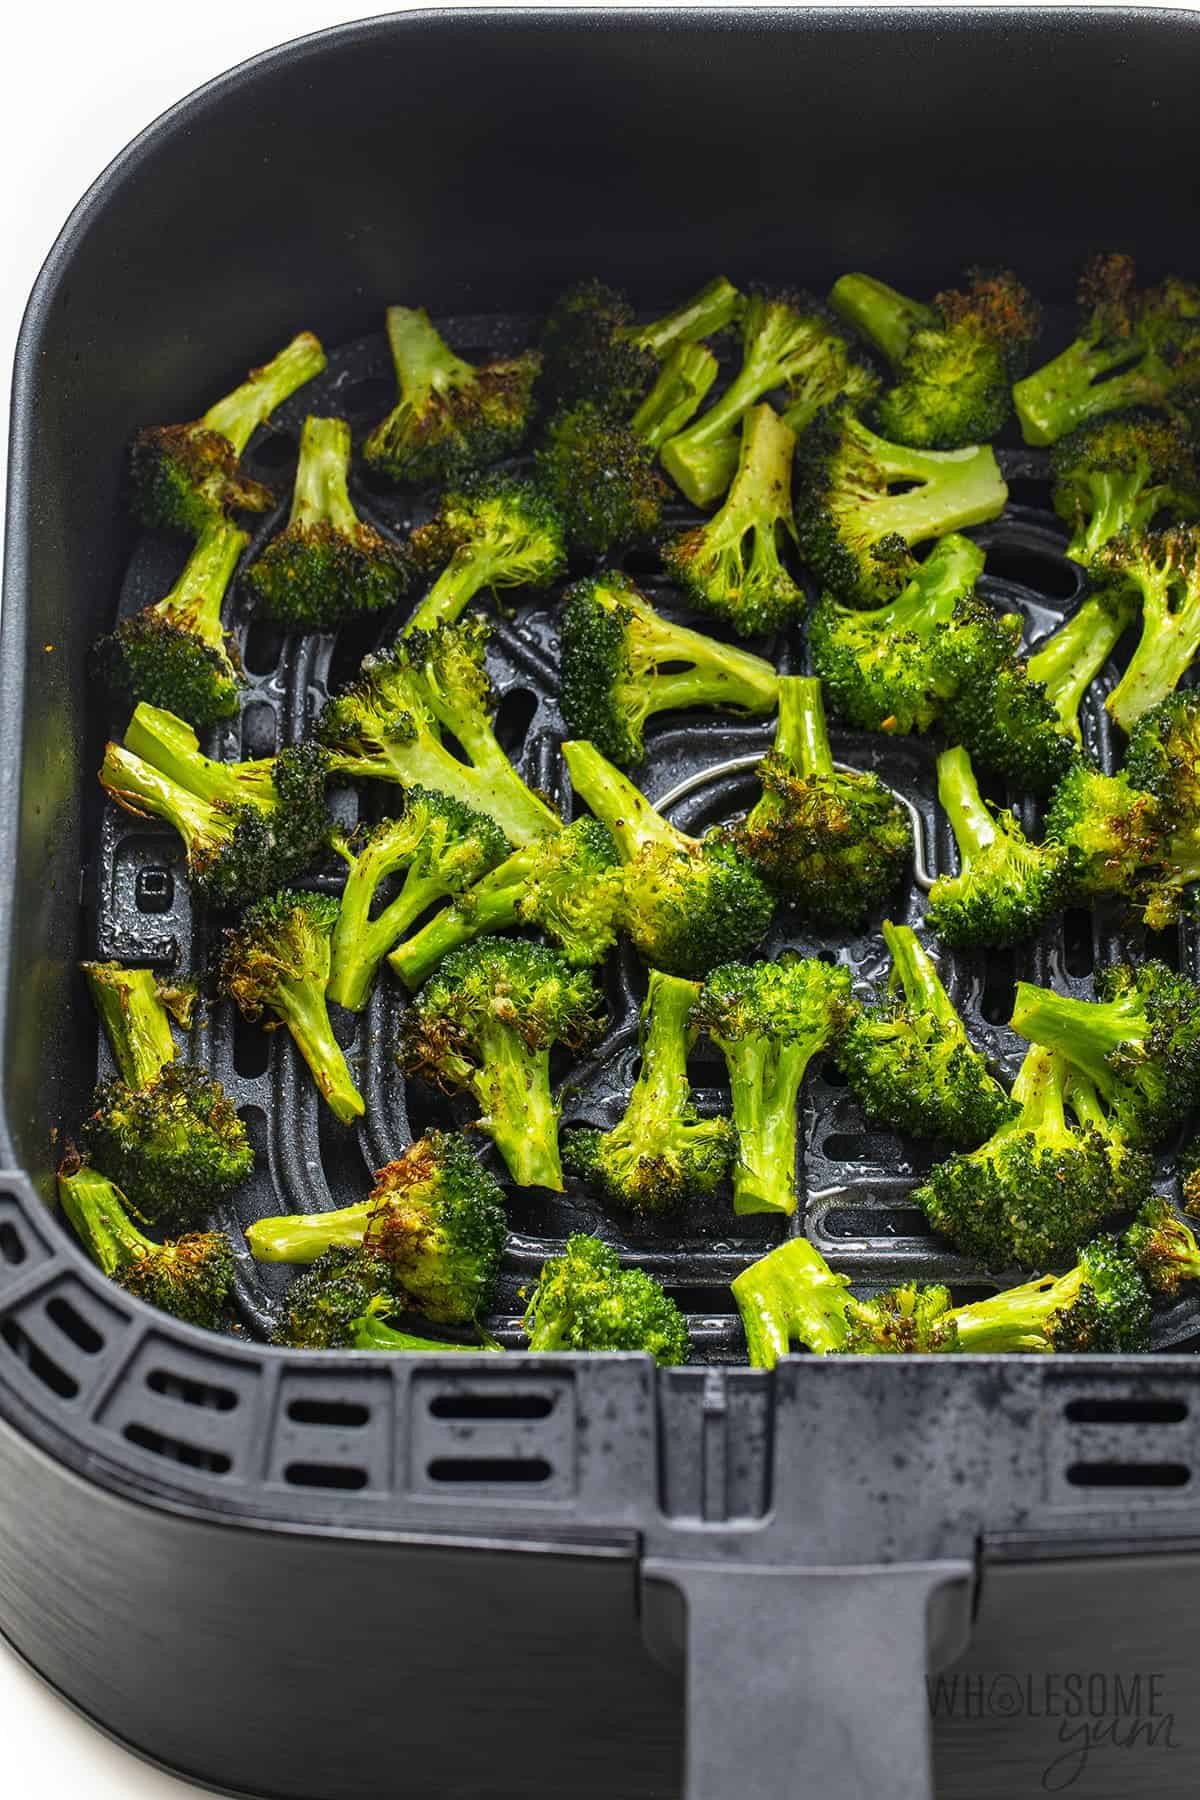 Roasted broccoli in air fryer